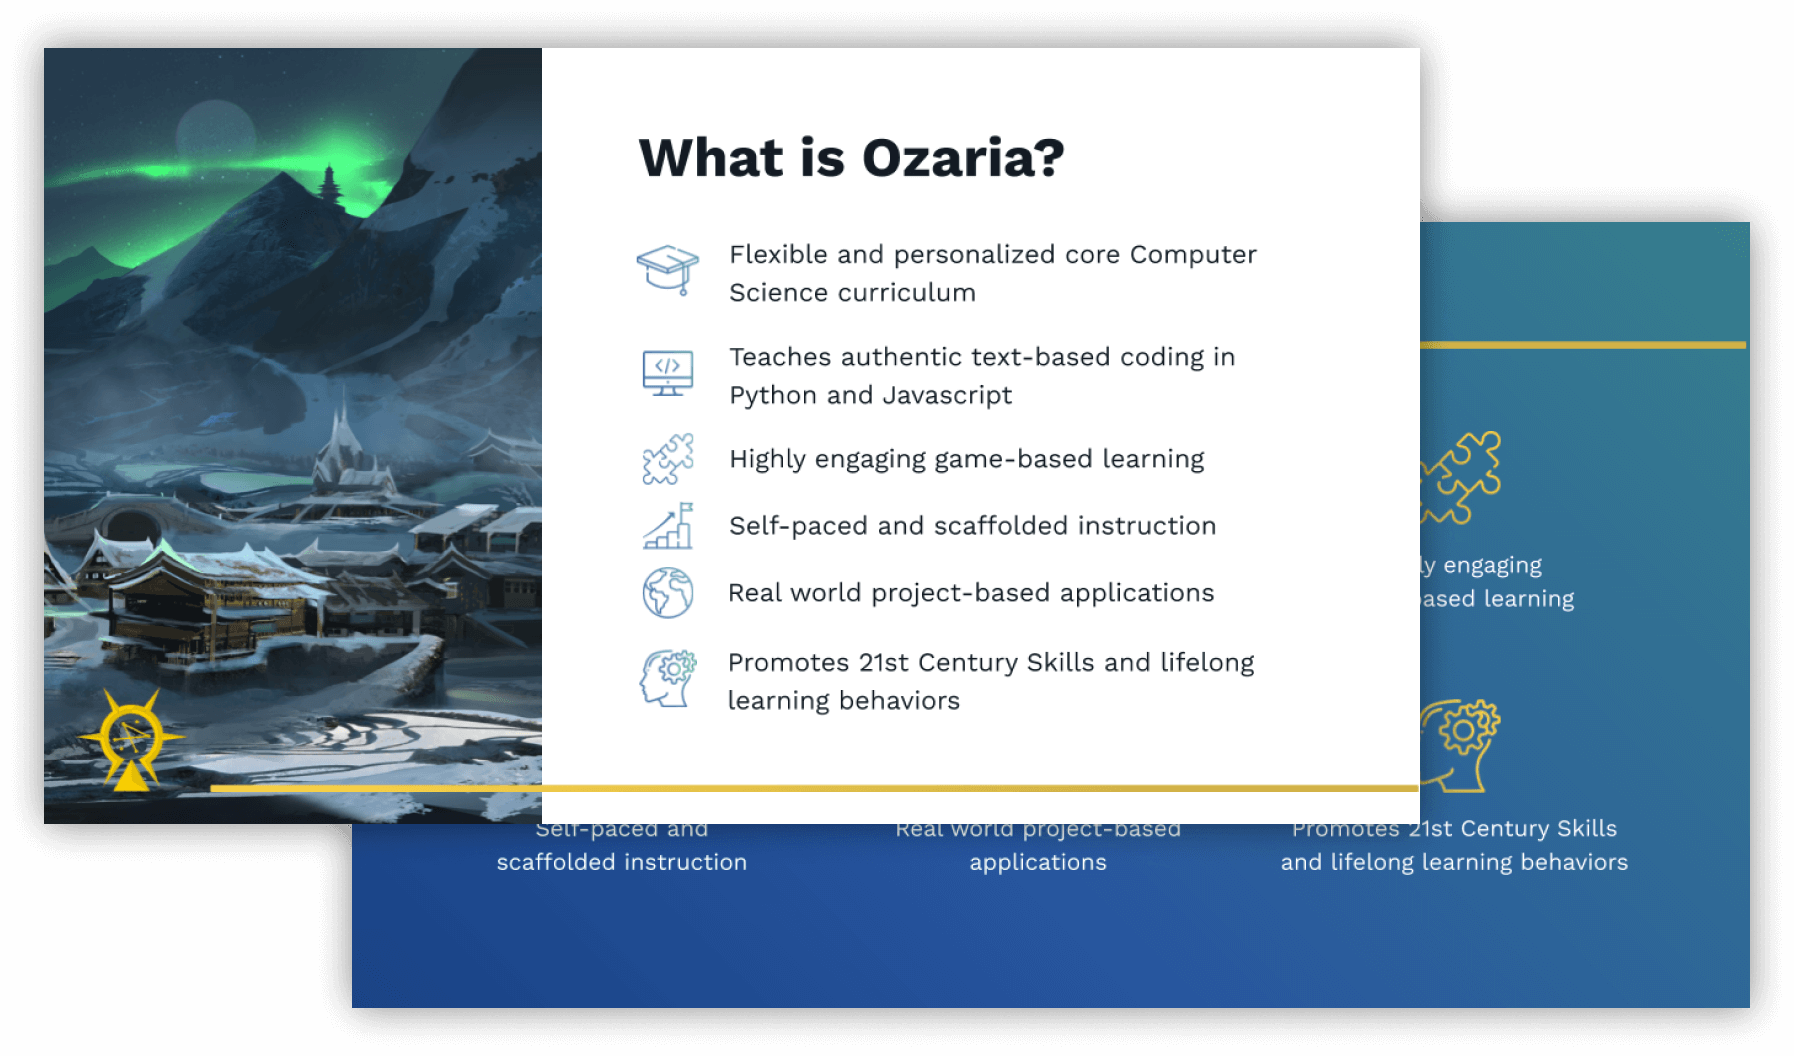 Slide with following text. What is Ozaria? Flexible and personalized core computer science curriculum. Teaches authentic text-based coding in Python and Javascript. Highly engaging game-based learning. Self-paced and scaffolded instruction. Real world project-based applications. Promotes 21st Century Skills and lifelong learning behaviors.